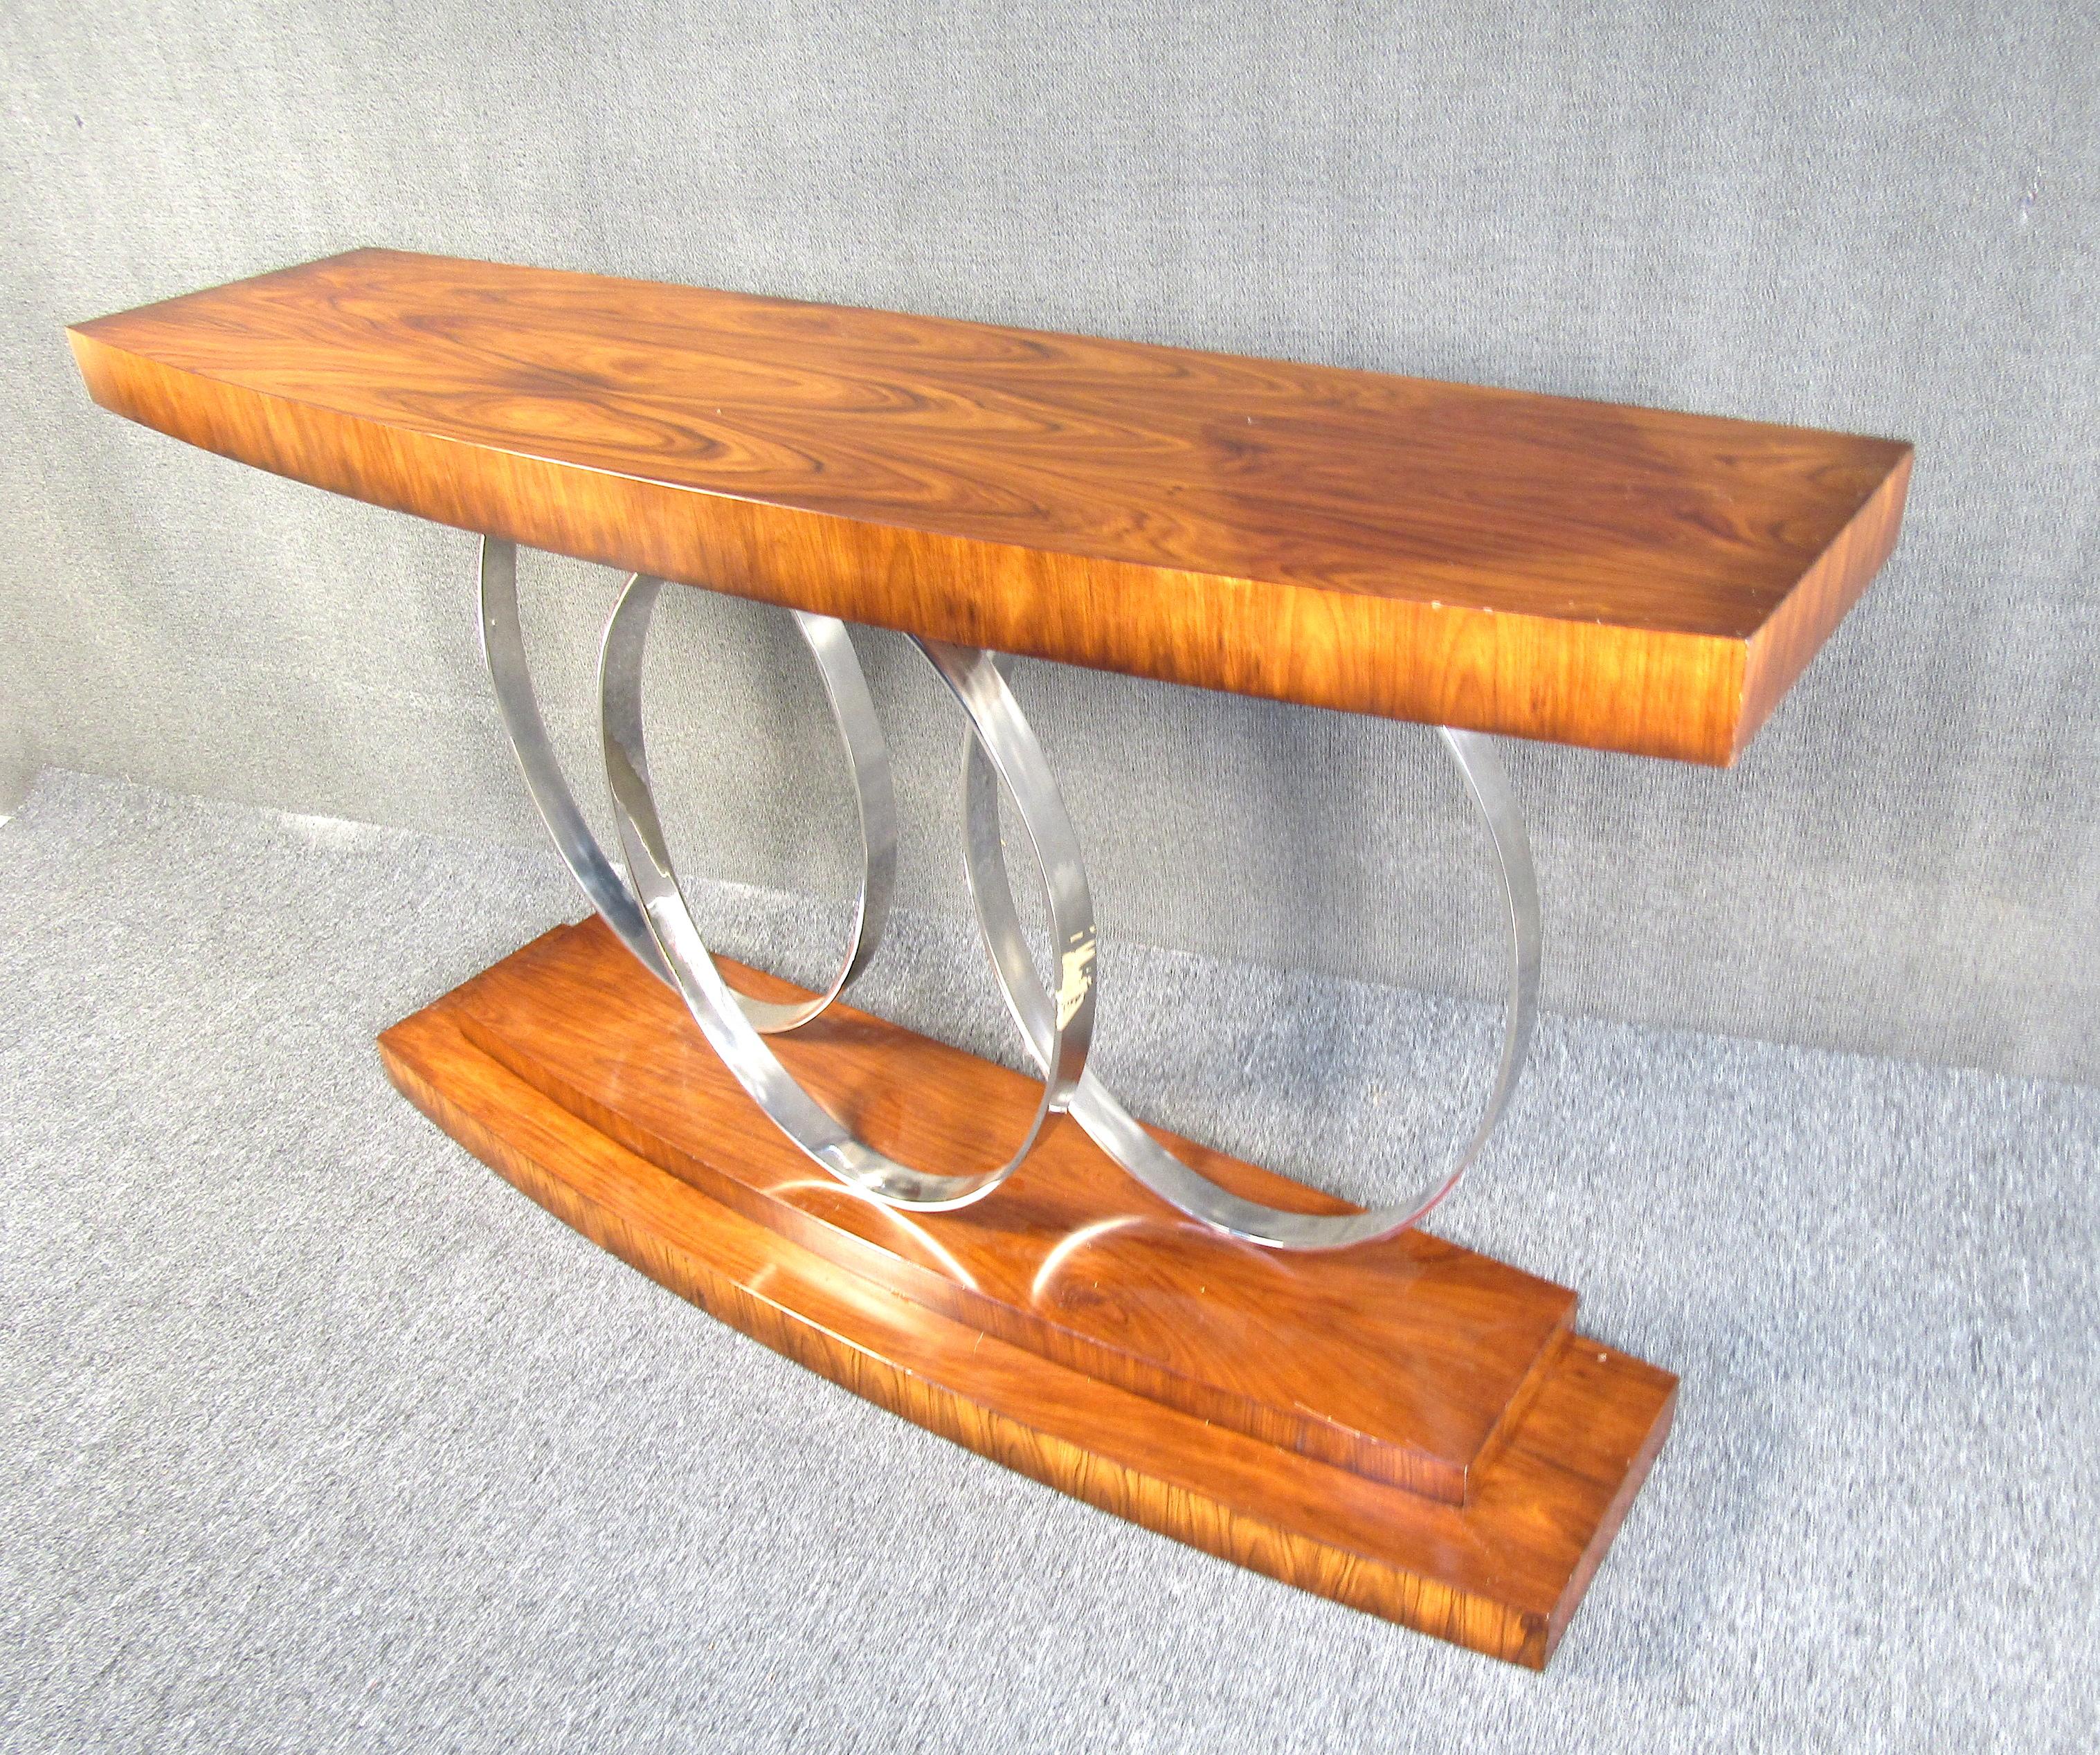 This impressive console table is both elegant in appearance and functional in design. Featuring rosewood this table will catch someone's eye from well across the room. With beautiful hues of red that are complemented by the chrome, this piece will